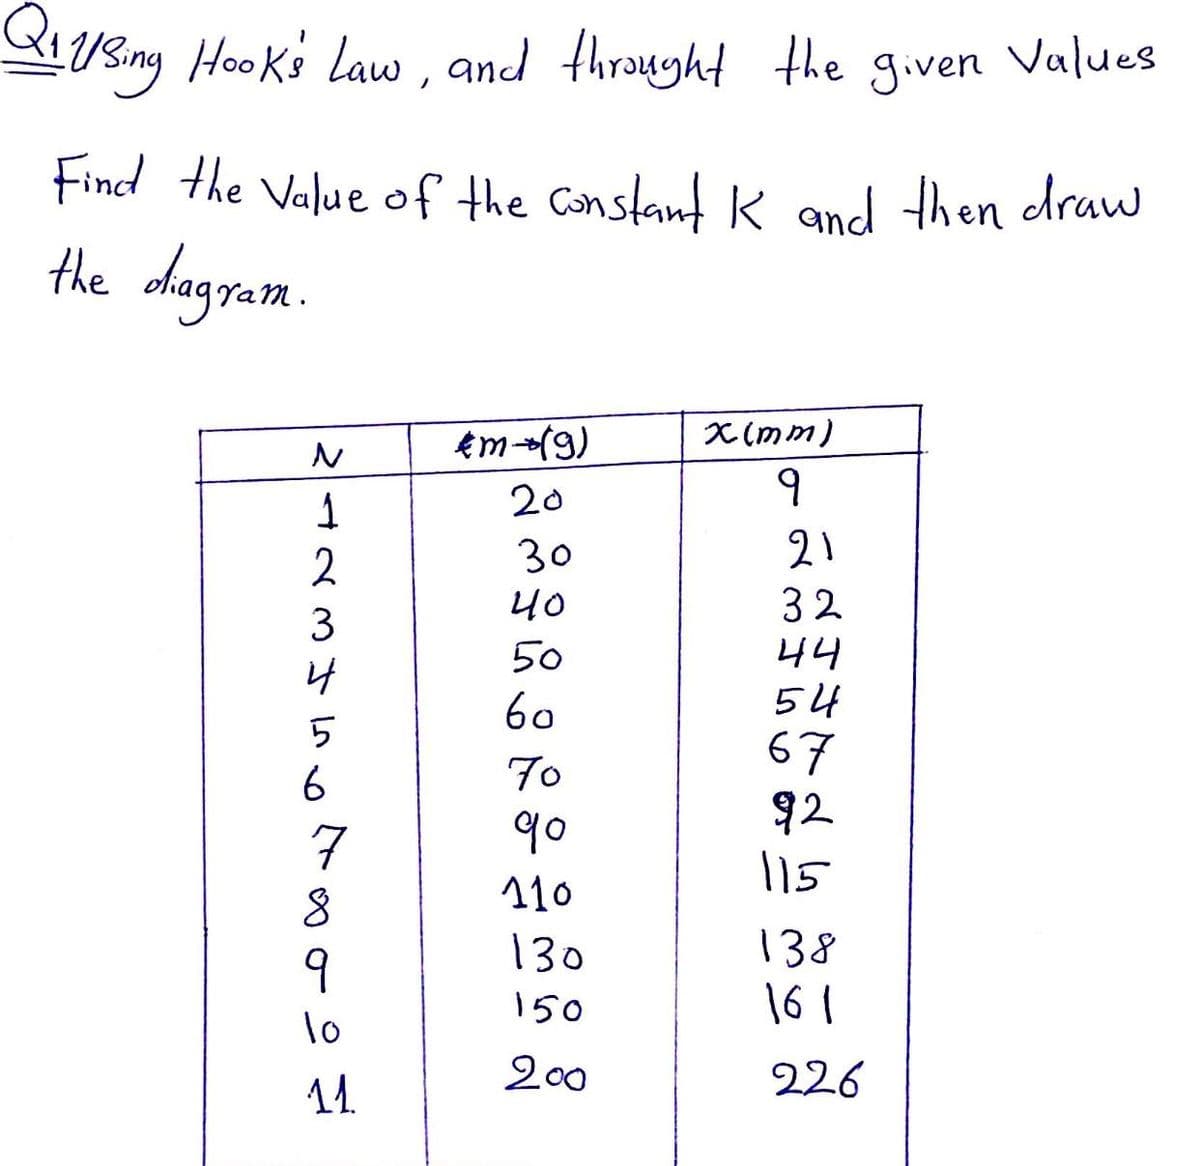 VSng Hoo ki Law , and throught the given Values
Find the Value of the Constant K and then draw
the dagram.
Em(9)
X (mm)
20
21
30
40
2
32
44
54
67
92
15
50
60
7o
7
110
138
16 1
130
150
1o
1.
200
226
